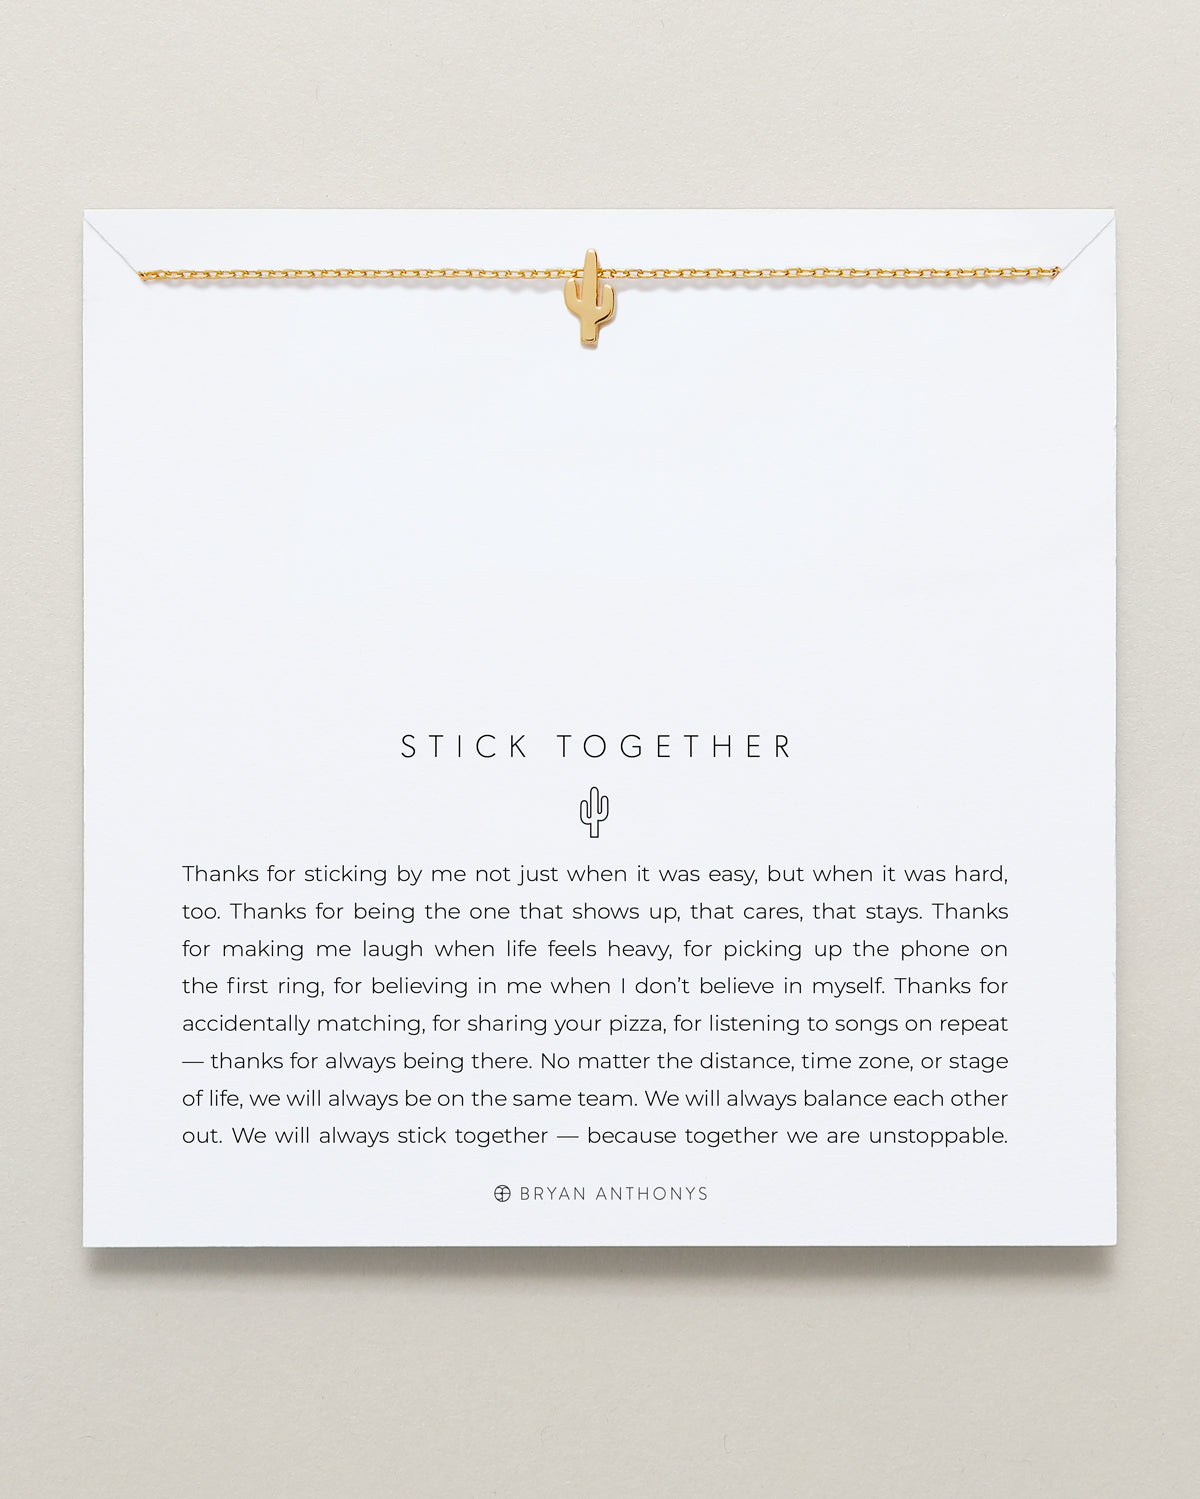 Bryan Anthonys Stick Together Gold Necklace On Card